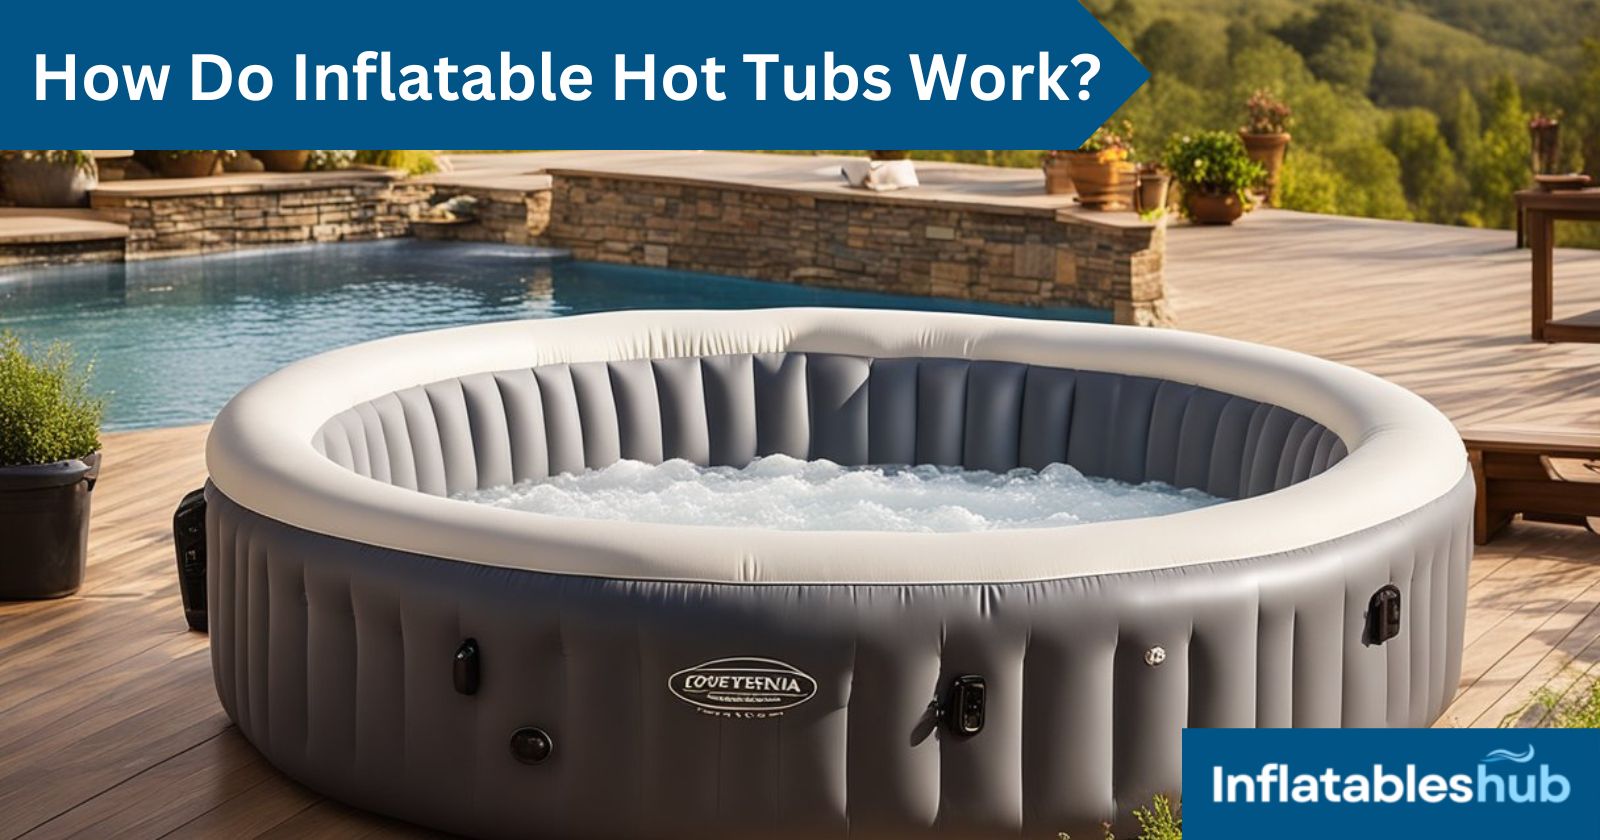 How Do Inflatable Hot Tubs Work